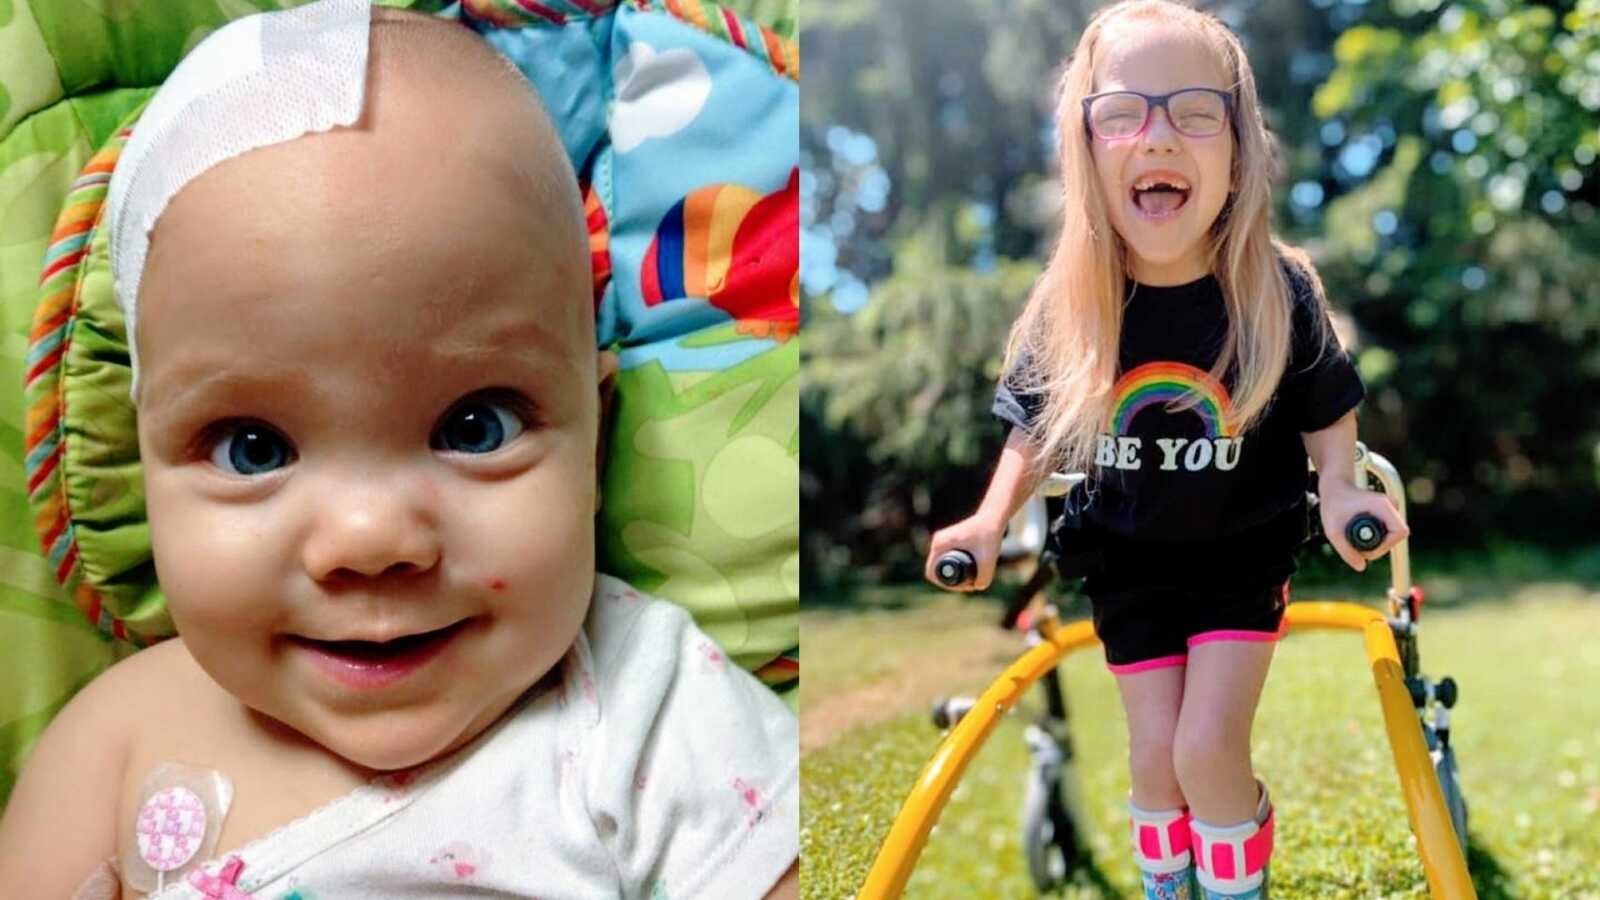 Special needs mom shares photos of daughter with cerebral palsy, one from after brain surgery as a baby and one now as she walks with a walker